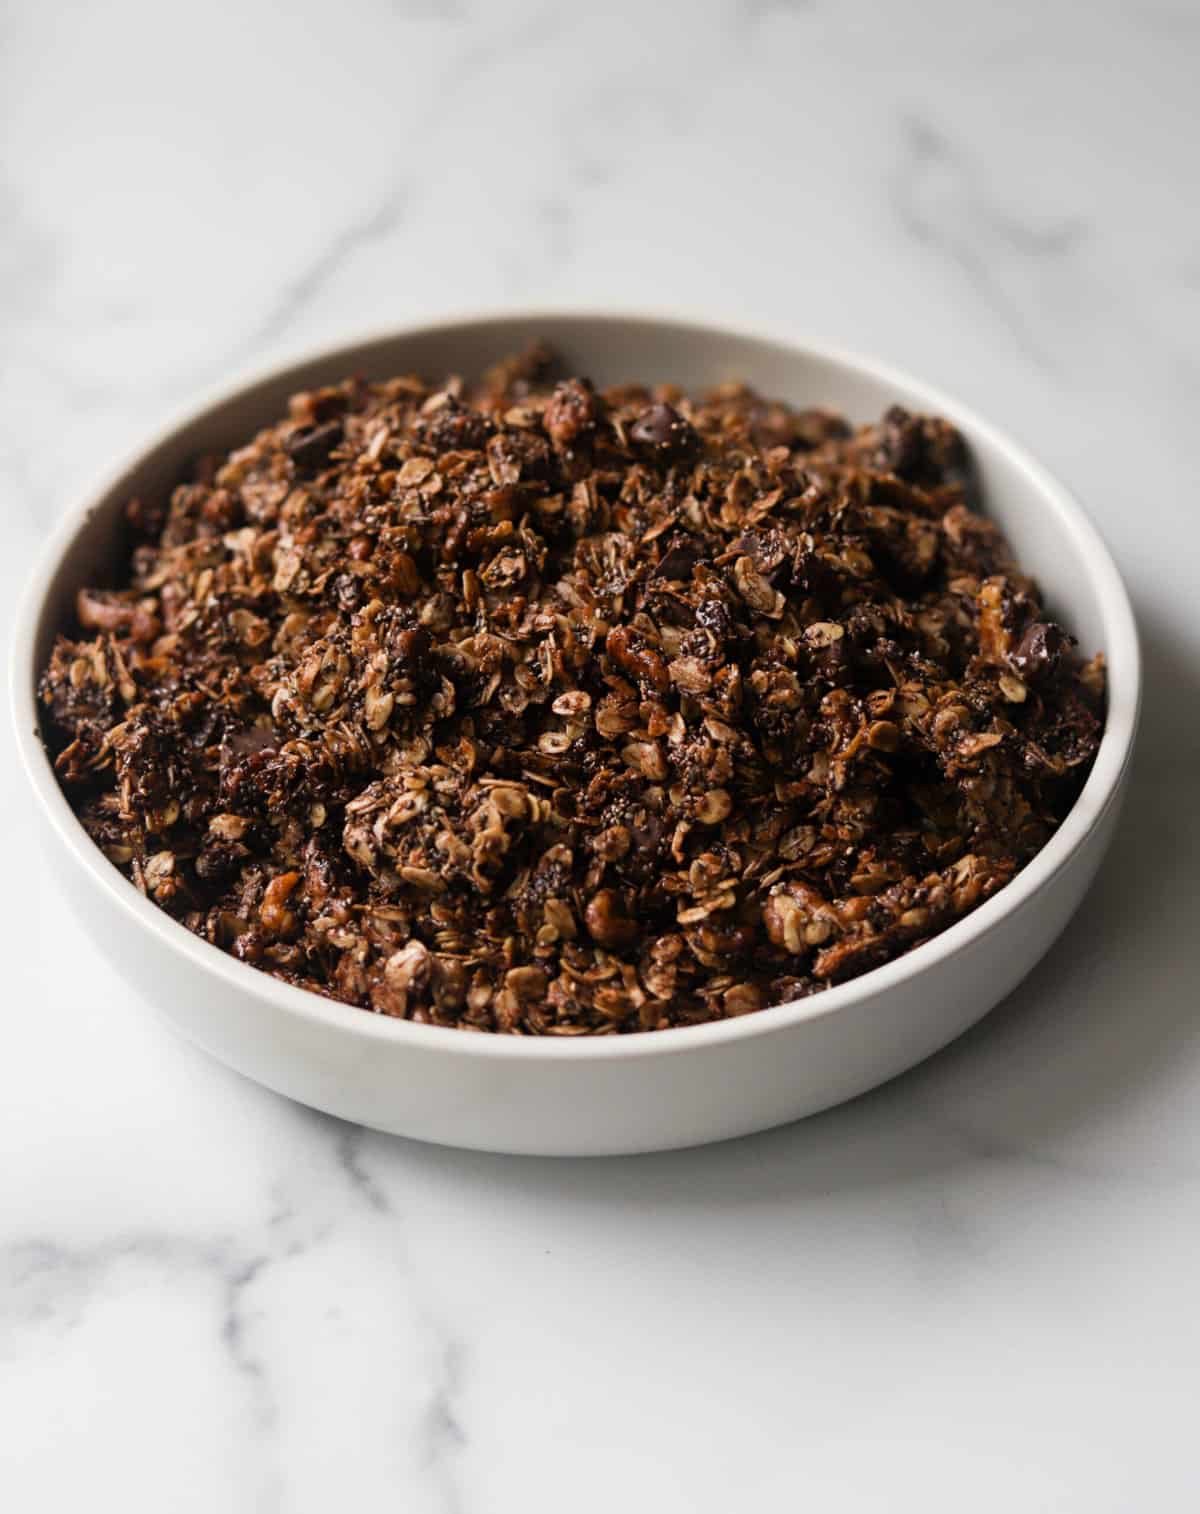 A side shot of a bowl of chocolate granola with coconut.